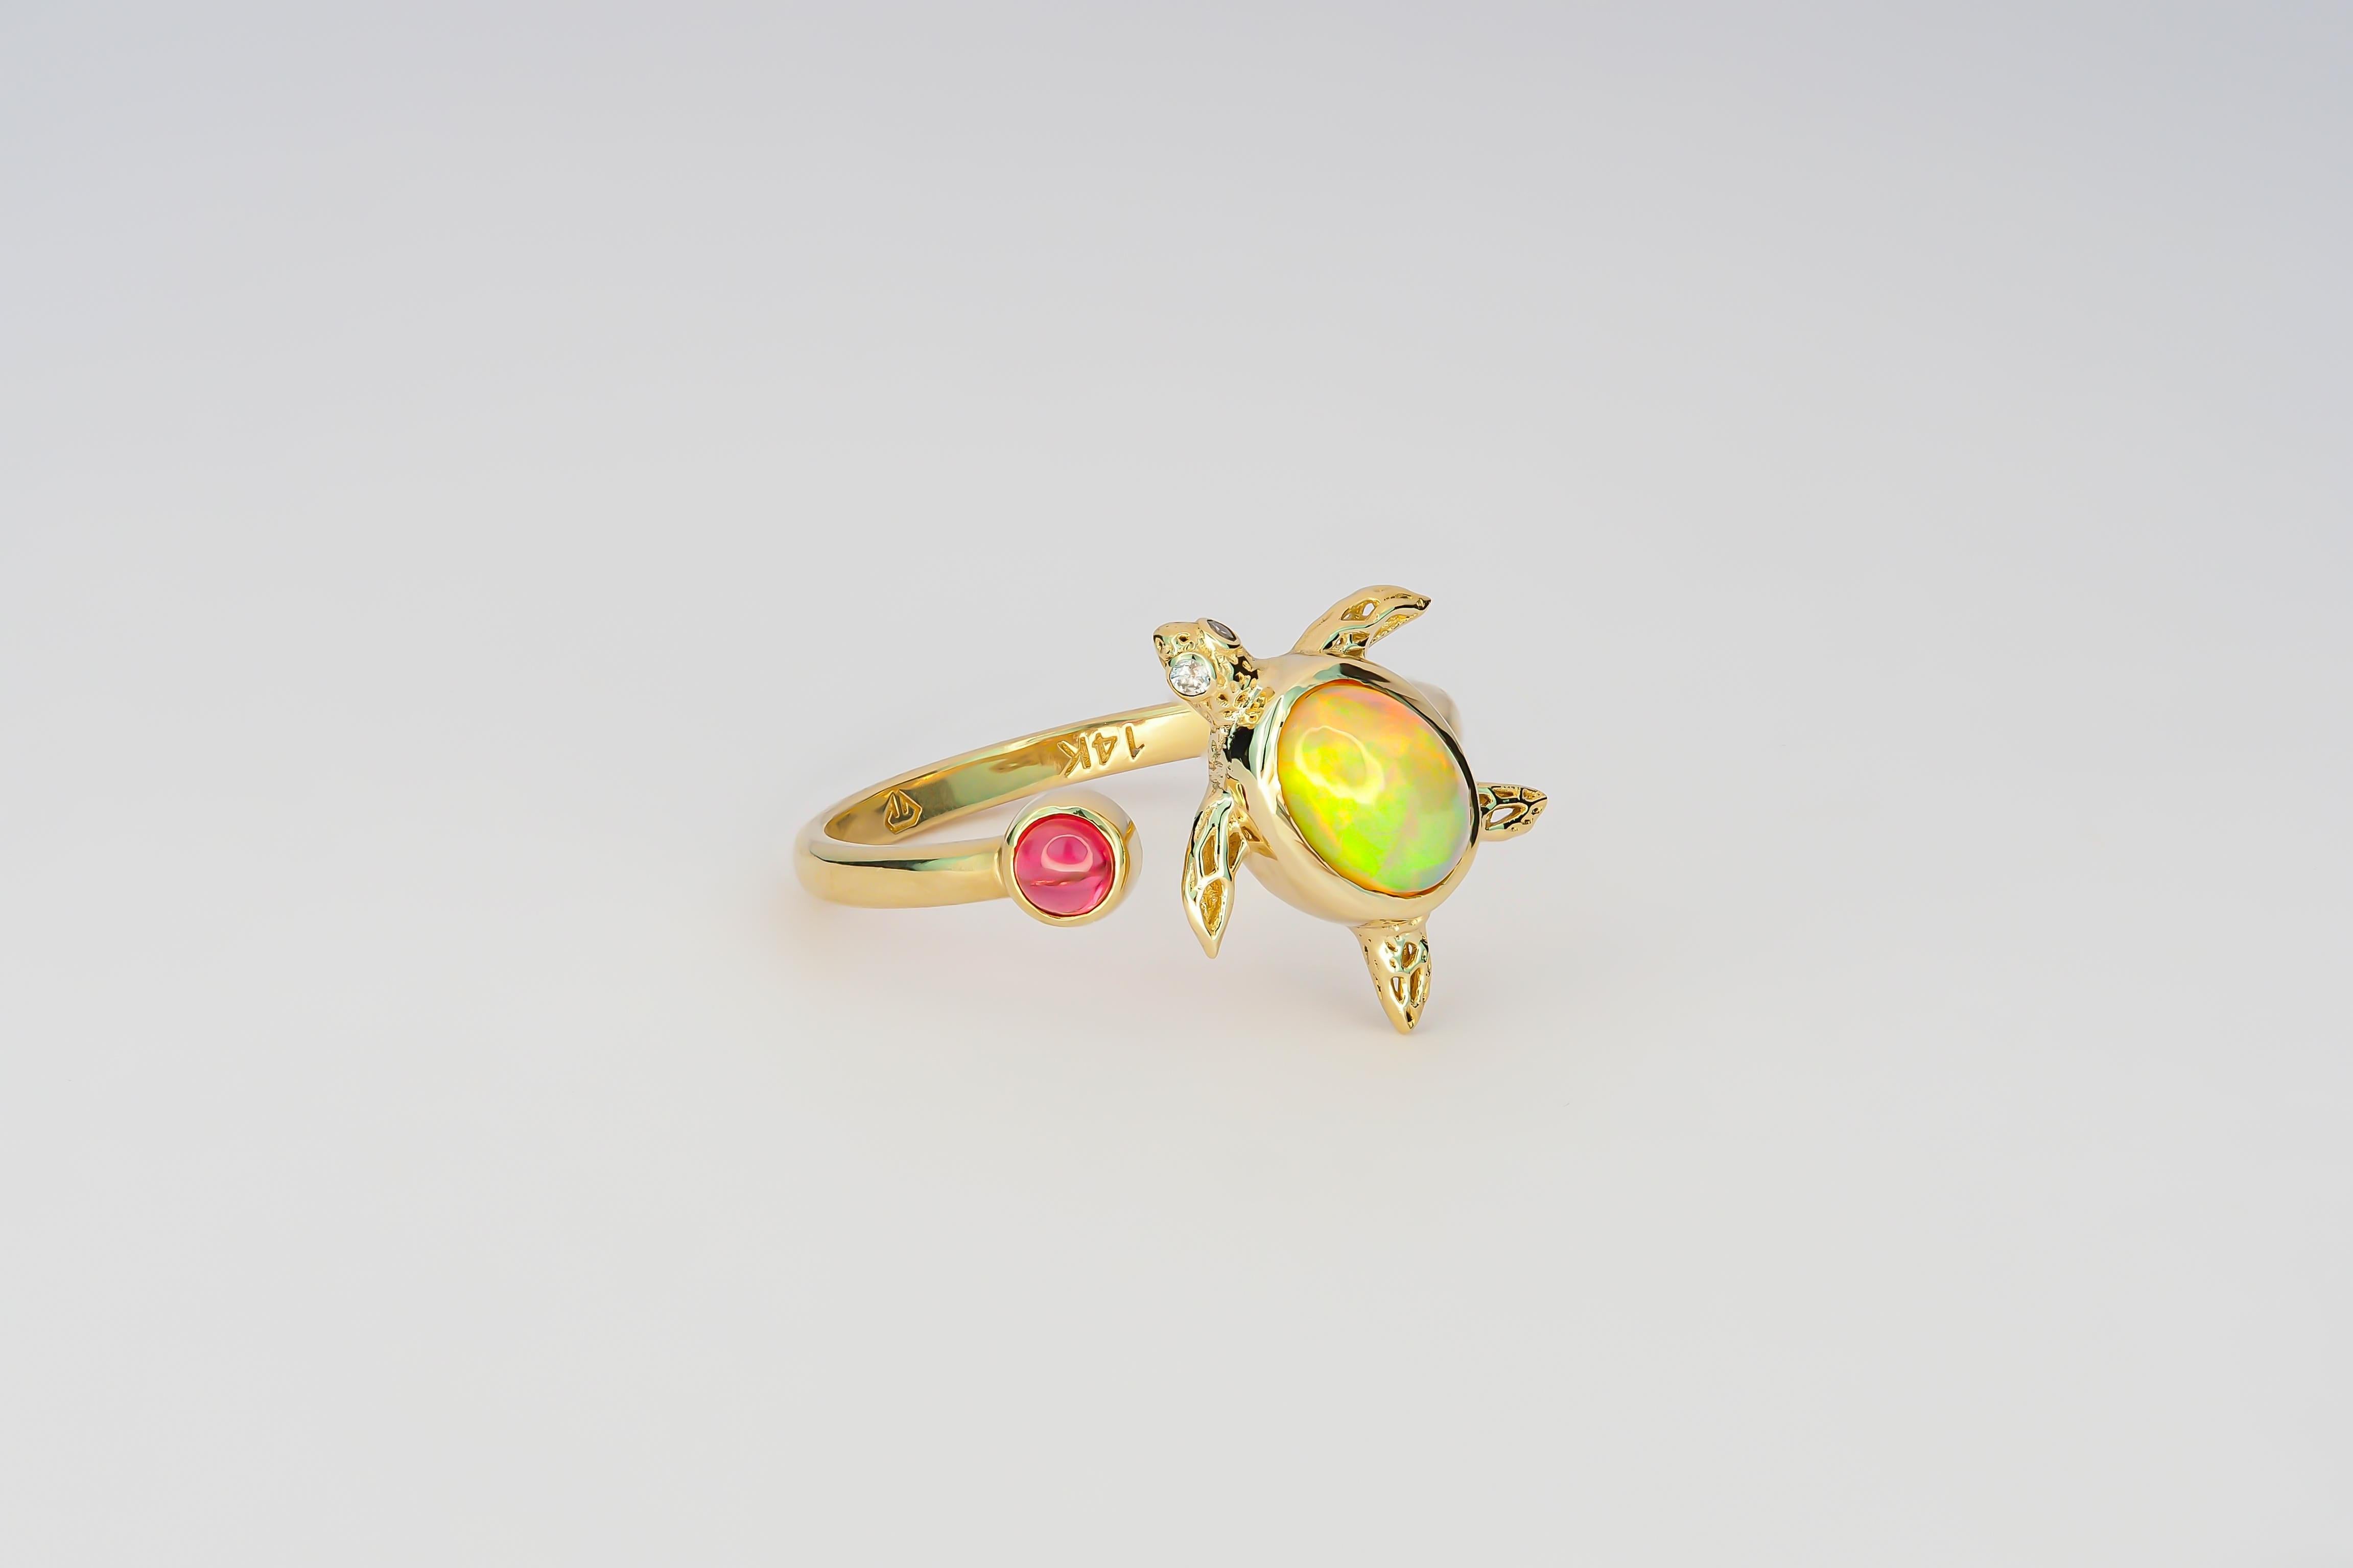 Turtle set: earrings studs and ring with opals in 14k gold. 
Opal oval cabochon earrings and ring in 14k gold.

Earrings:
Metal: 14k gold
Weight: 2.20 g. 
Size:  12.6 x8 mm
Main stone opal, solid , 2 pieces
Opal: color - multicolor
Oval cabochon